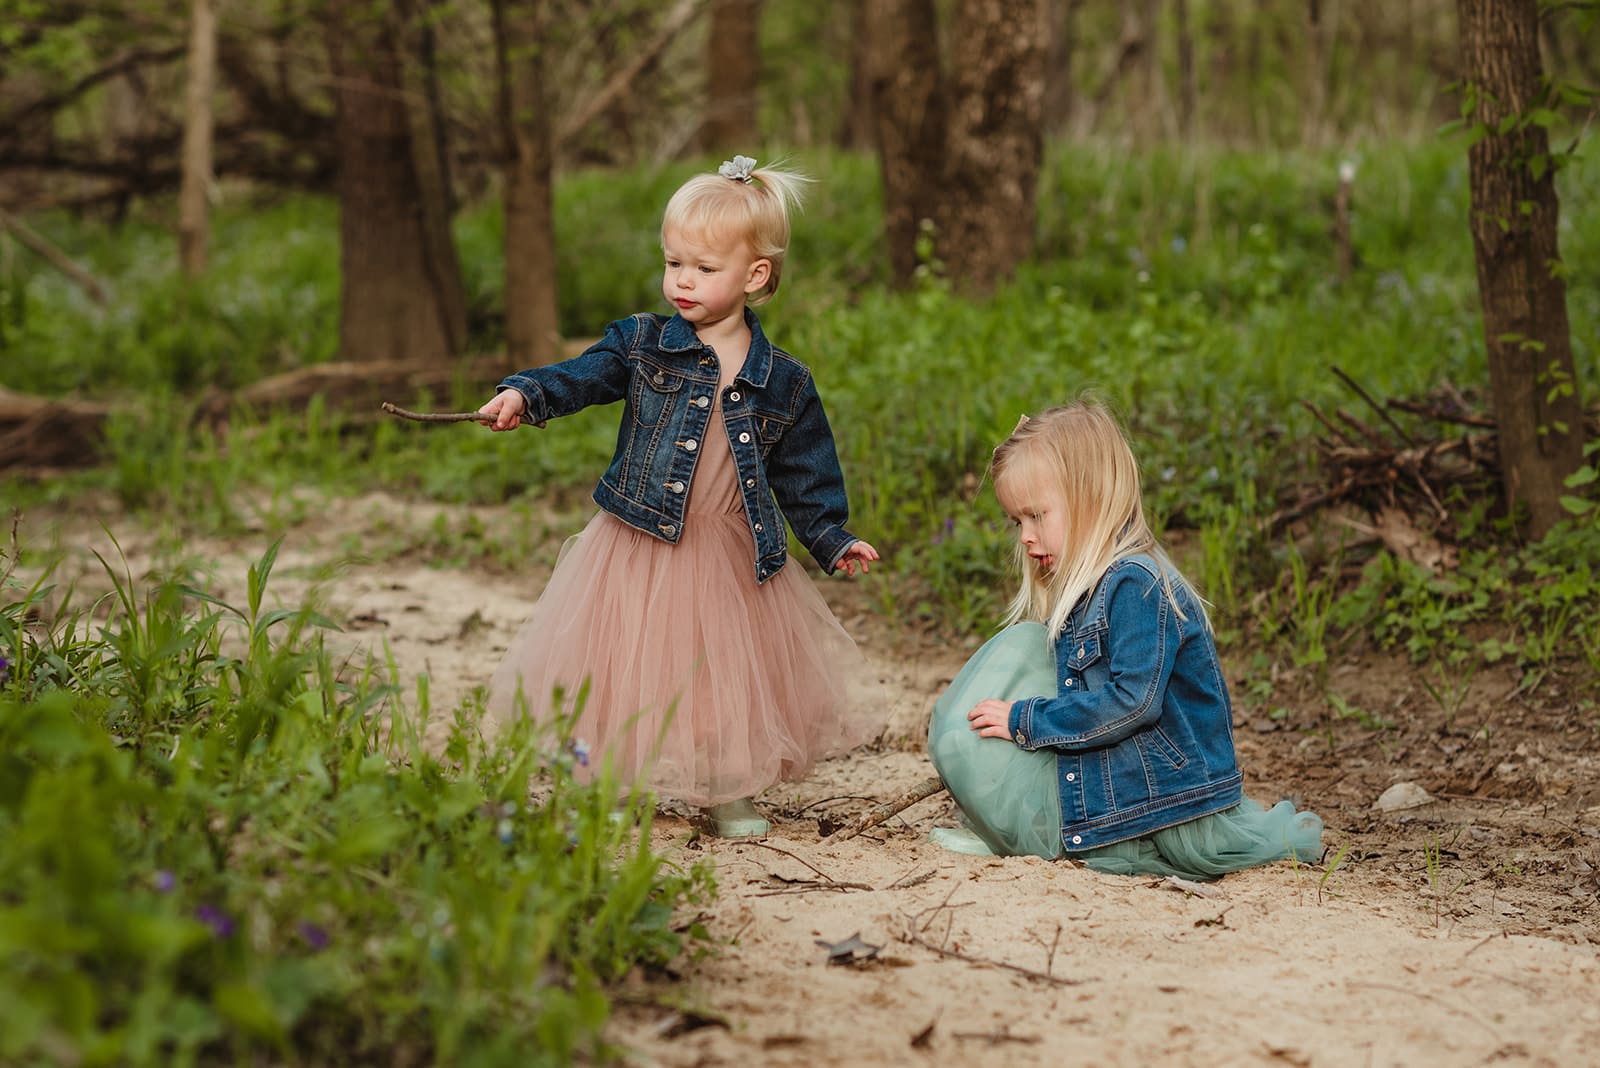 sisters in denim jackets and dresses playing on a dirt path